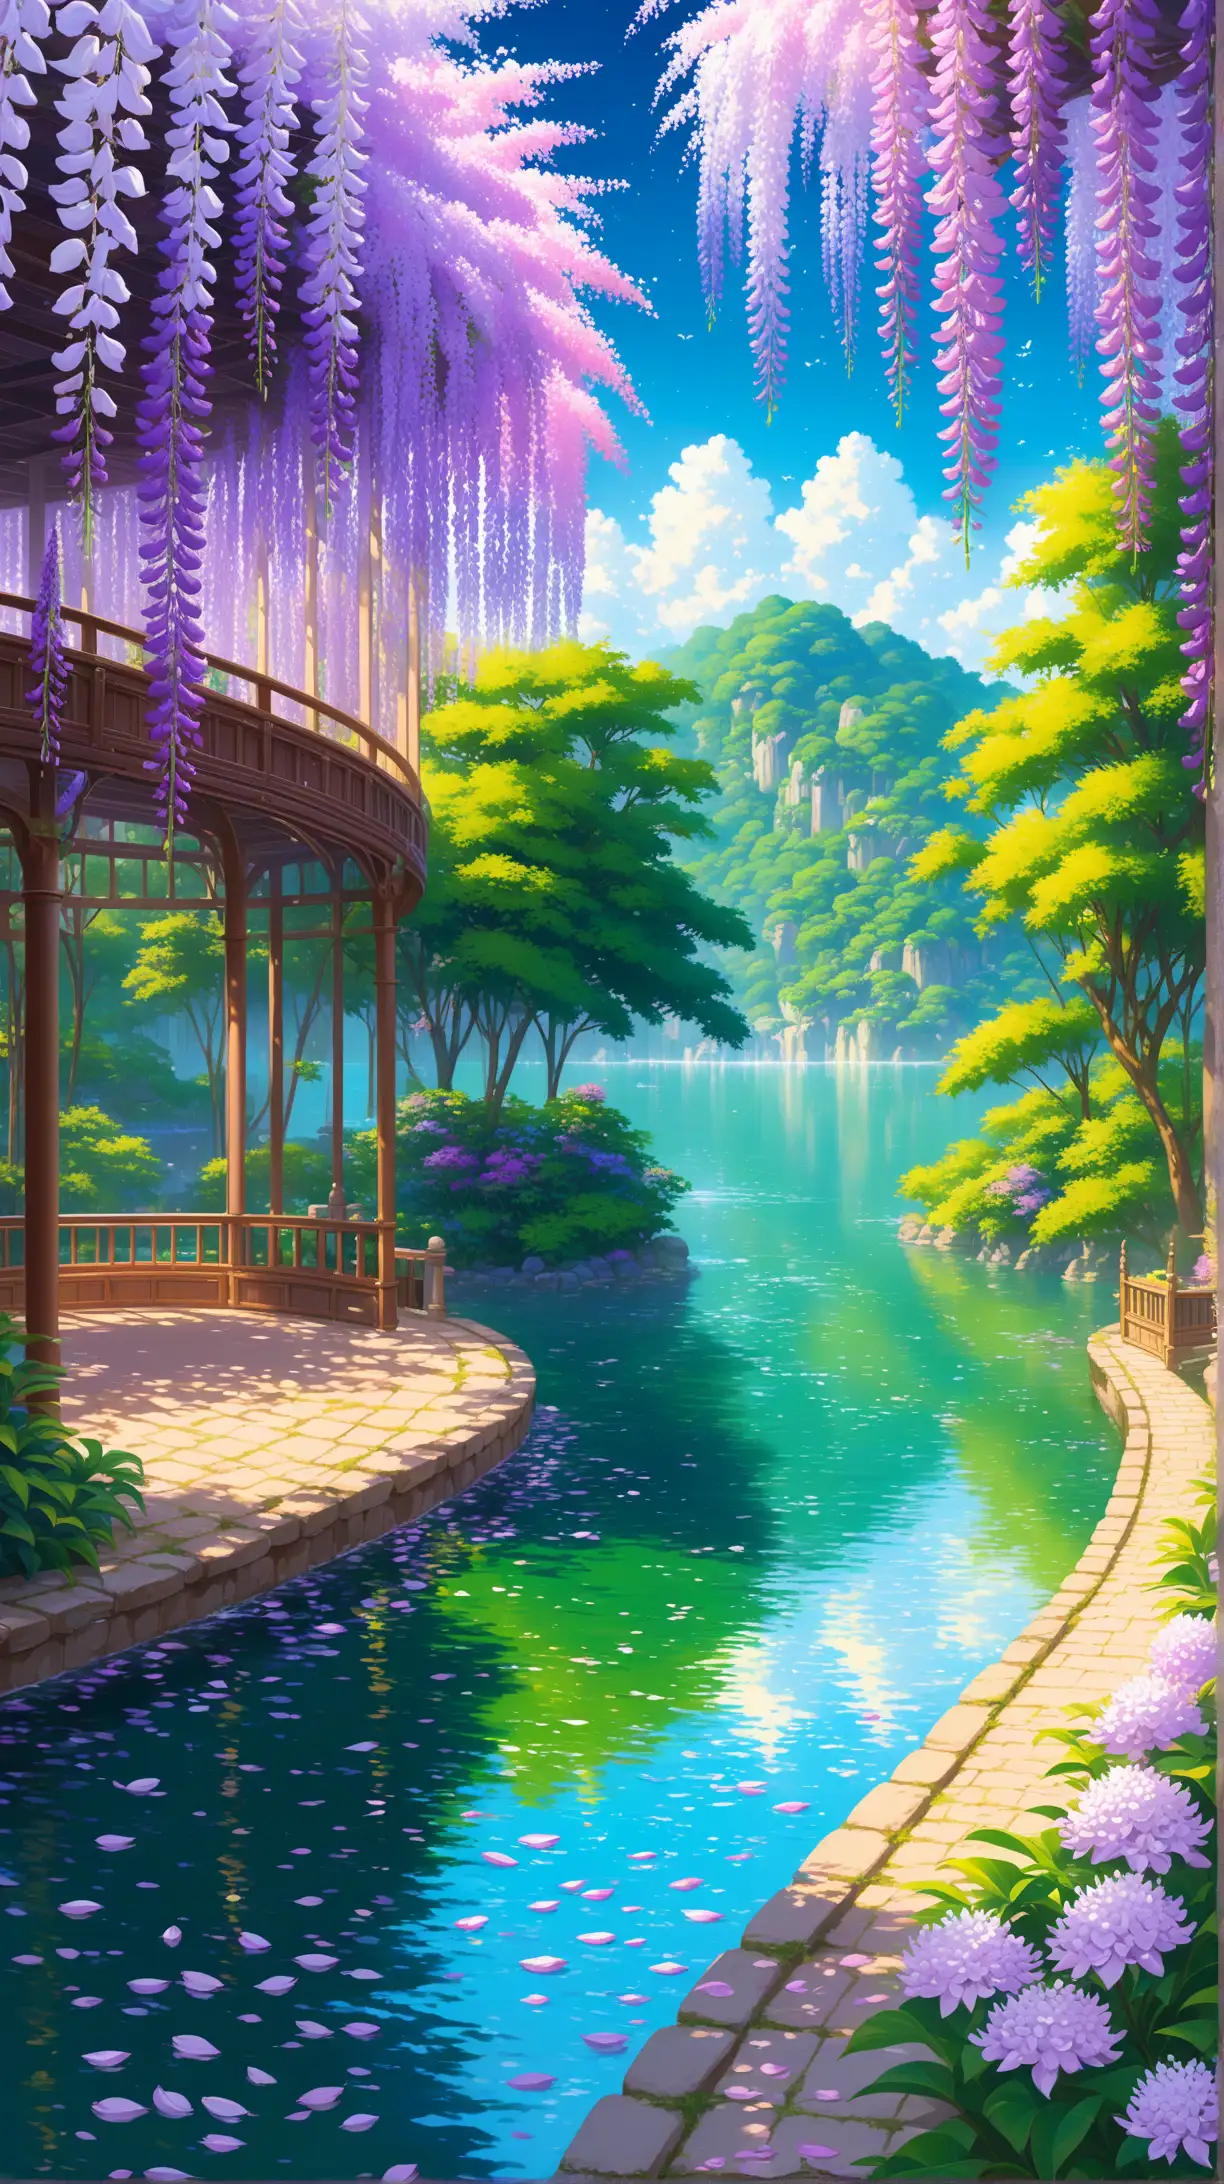 Ghibli Garden Dreams Mesmerizing Wisteria and Lily Piers in Ultra Detailed 3D Render